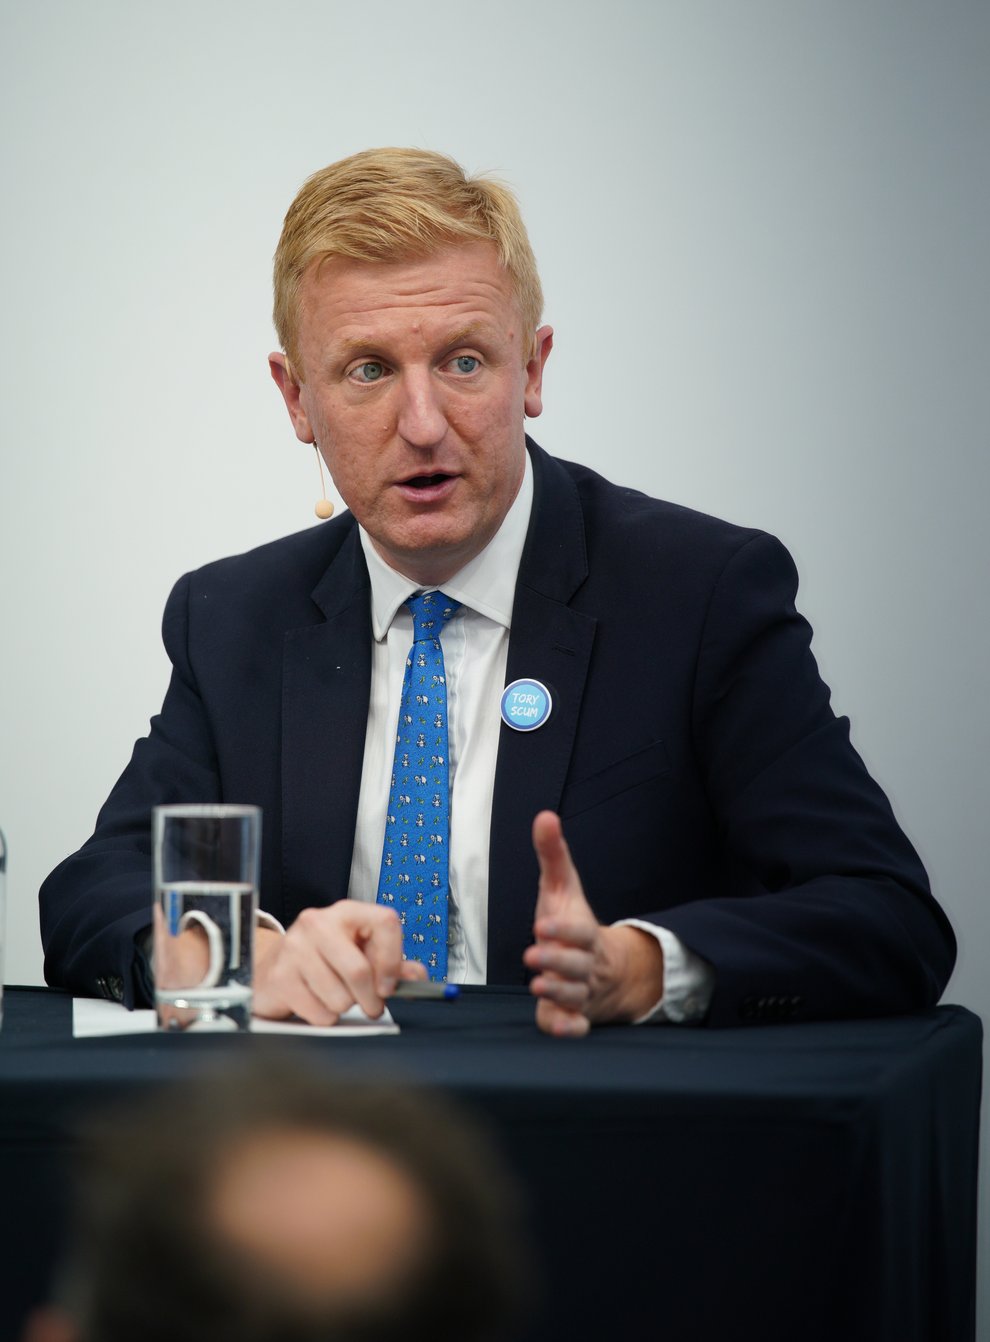 Conservative Party chairman Oliver Dowden wearing a ‘Tory Scum’ badge during the Conservative Party Conference in Manchester (PA)